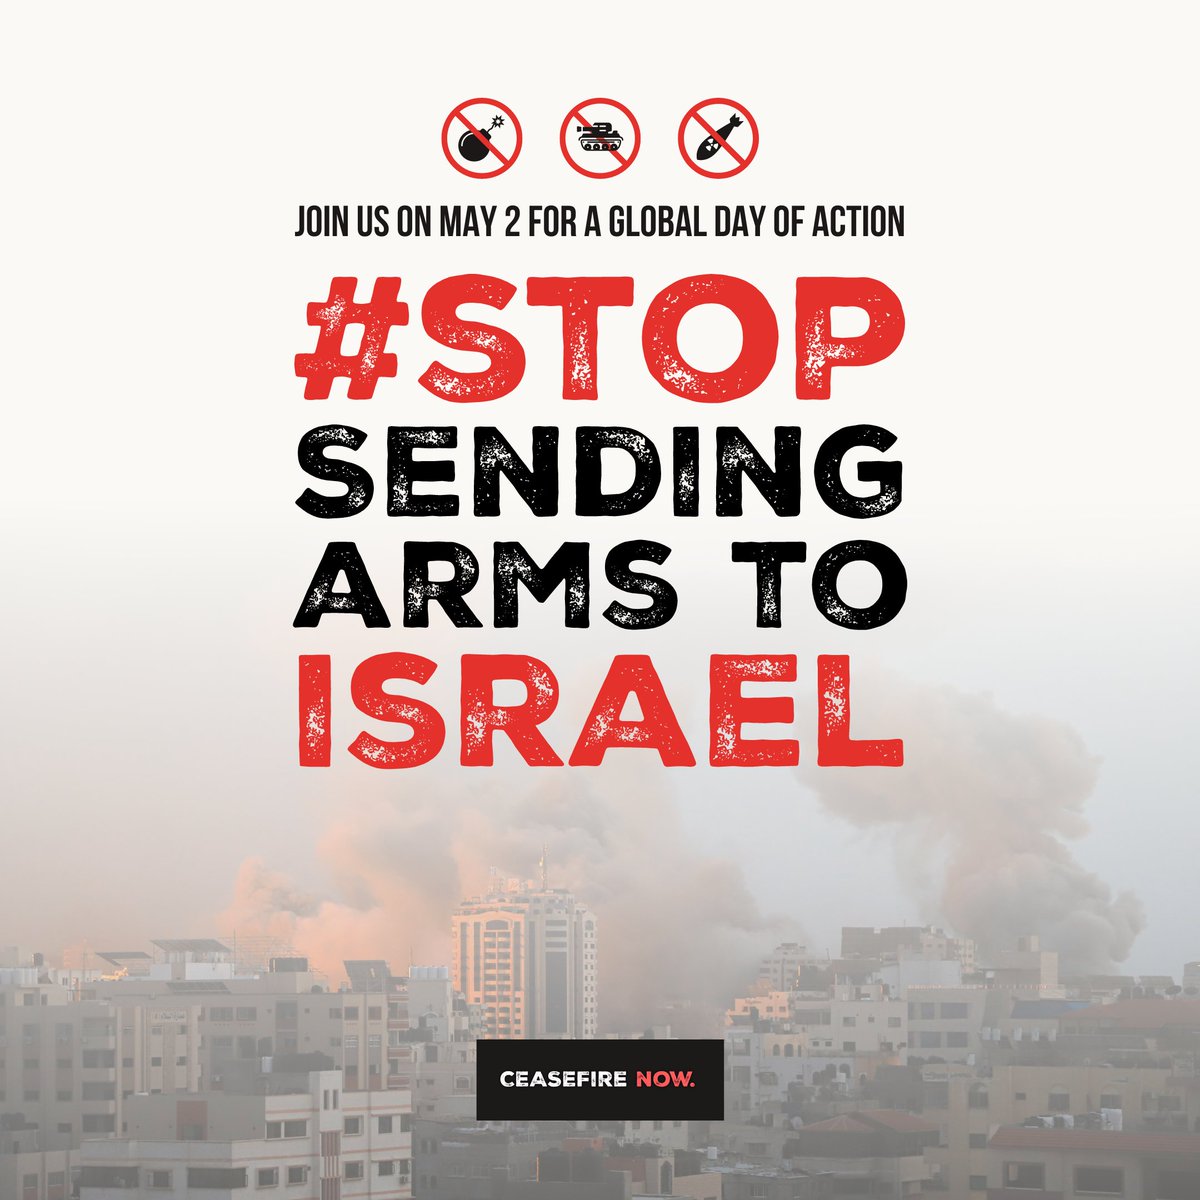 🛑 Arms sales and transfers to Israel MUST STOP and steps towards an immediate sustained ceasefire must begin. End the human suffering in Gaza now! #StopSendingArms #CeasefireNOW #AllOnYouBiden #BidensLegacy